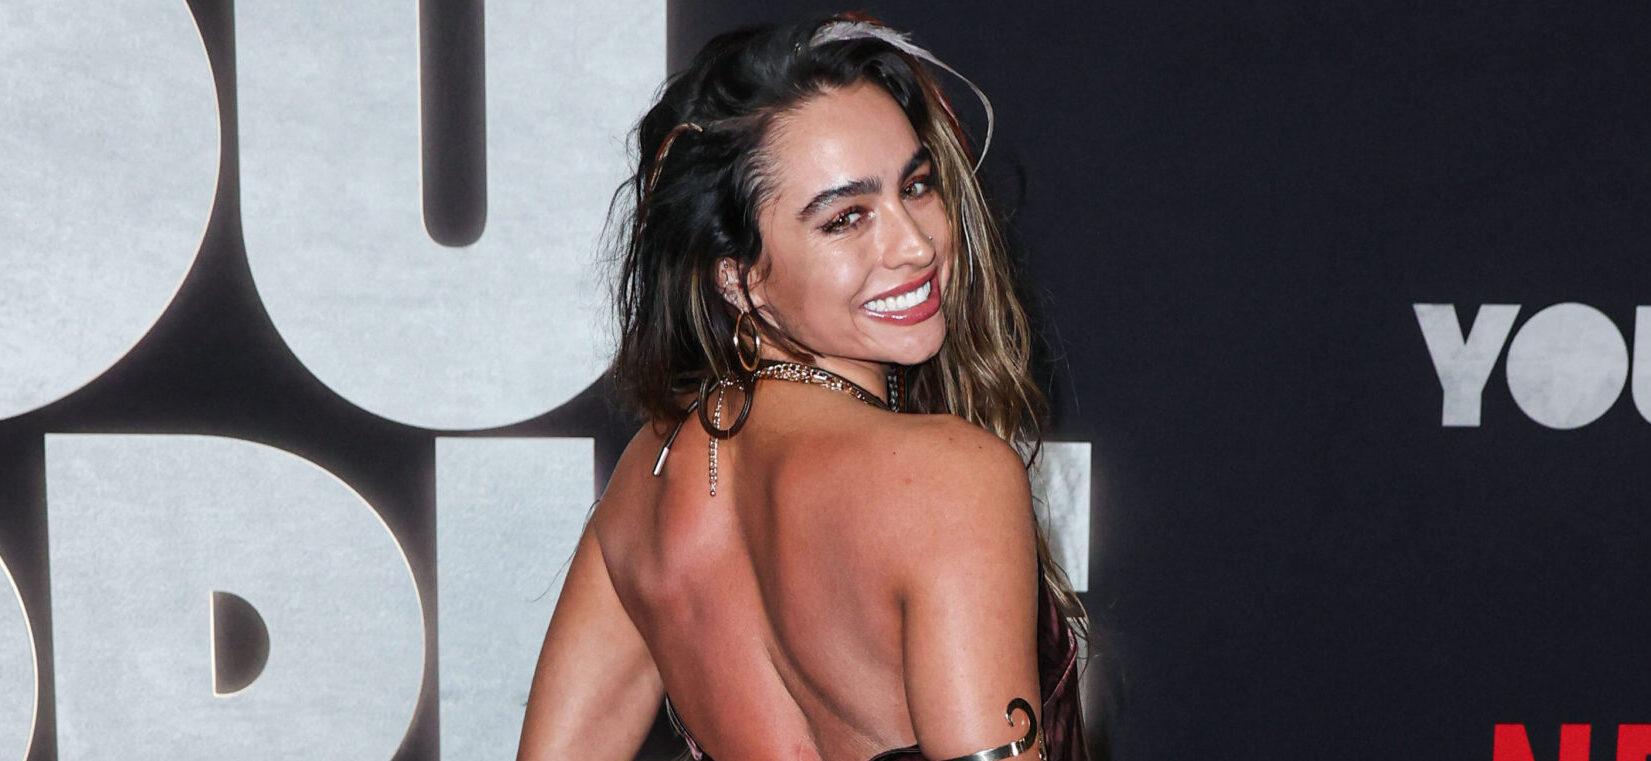 WESTWOOD, LOS ANGELES, CALIFORNIA, USA - JANUARY 17: Los Angeles Premiere Of Netflix's 'You People' held at the Regency Village Theatre on January 17, 2023 in Westwood, Los Angeles, California, United States. 18 Jan 2023 Pictured: Sommer Ray. Photo credit: Xavier Collin/Image Press Agency / MEGA TheMegaAgency.com +1 888 505 6342 (Mega Agency TagID: MEGA933824_061.jpg) [Photo via Mega Agency]